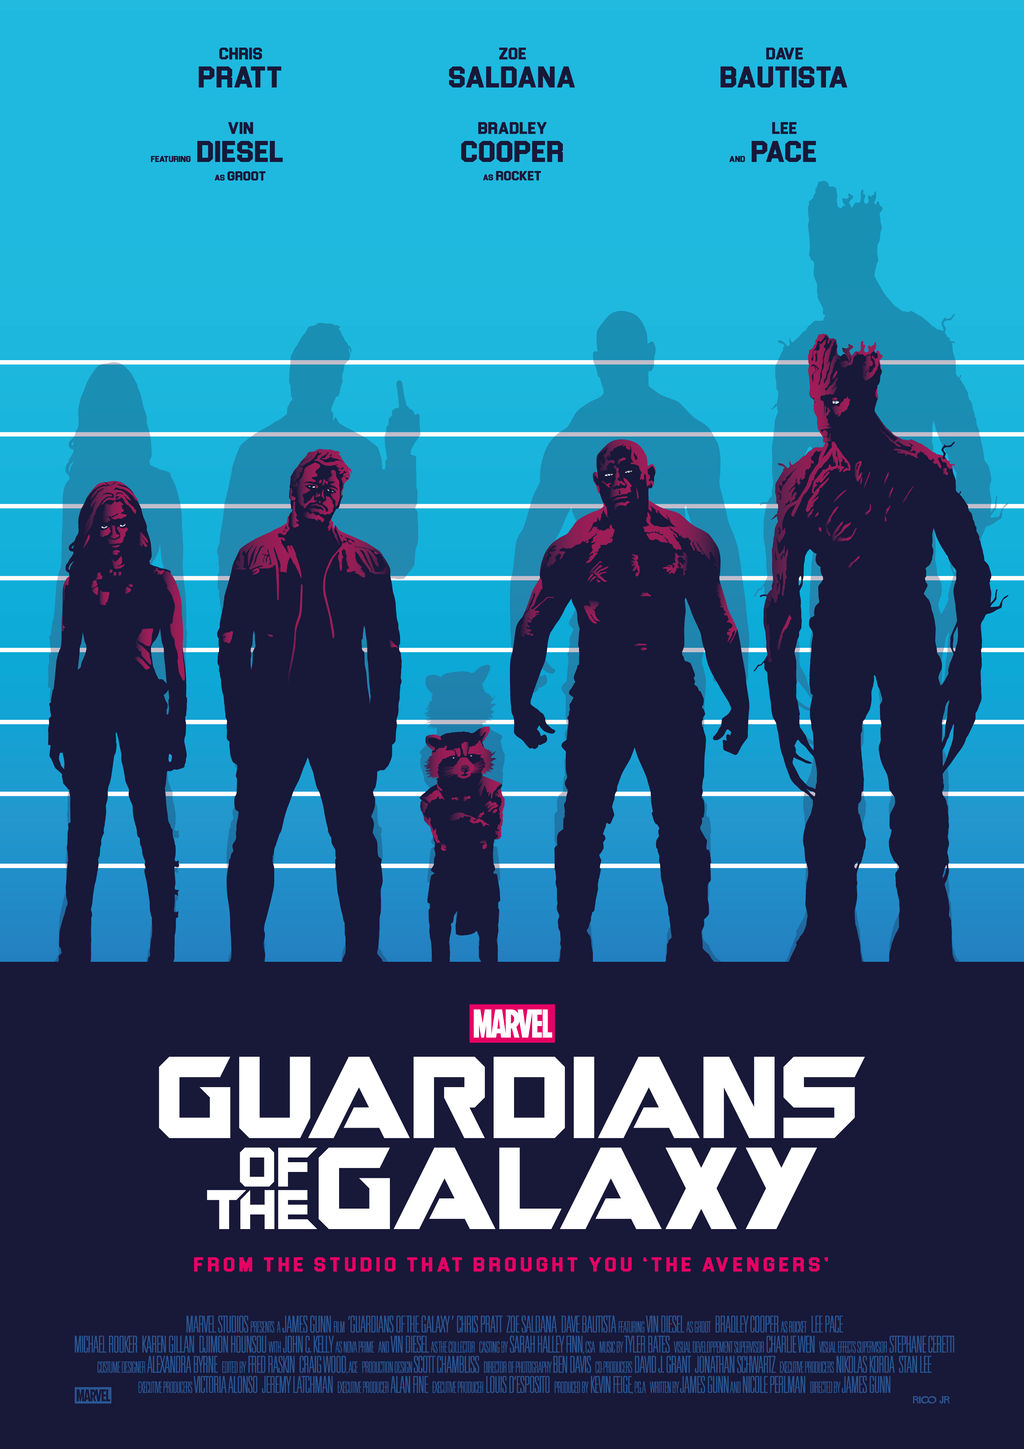 USUAL GUARDIANS OF THE GALAXY Poster Art (1/2) by RicoJrCreation on  DeviantArt